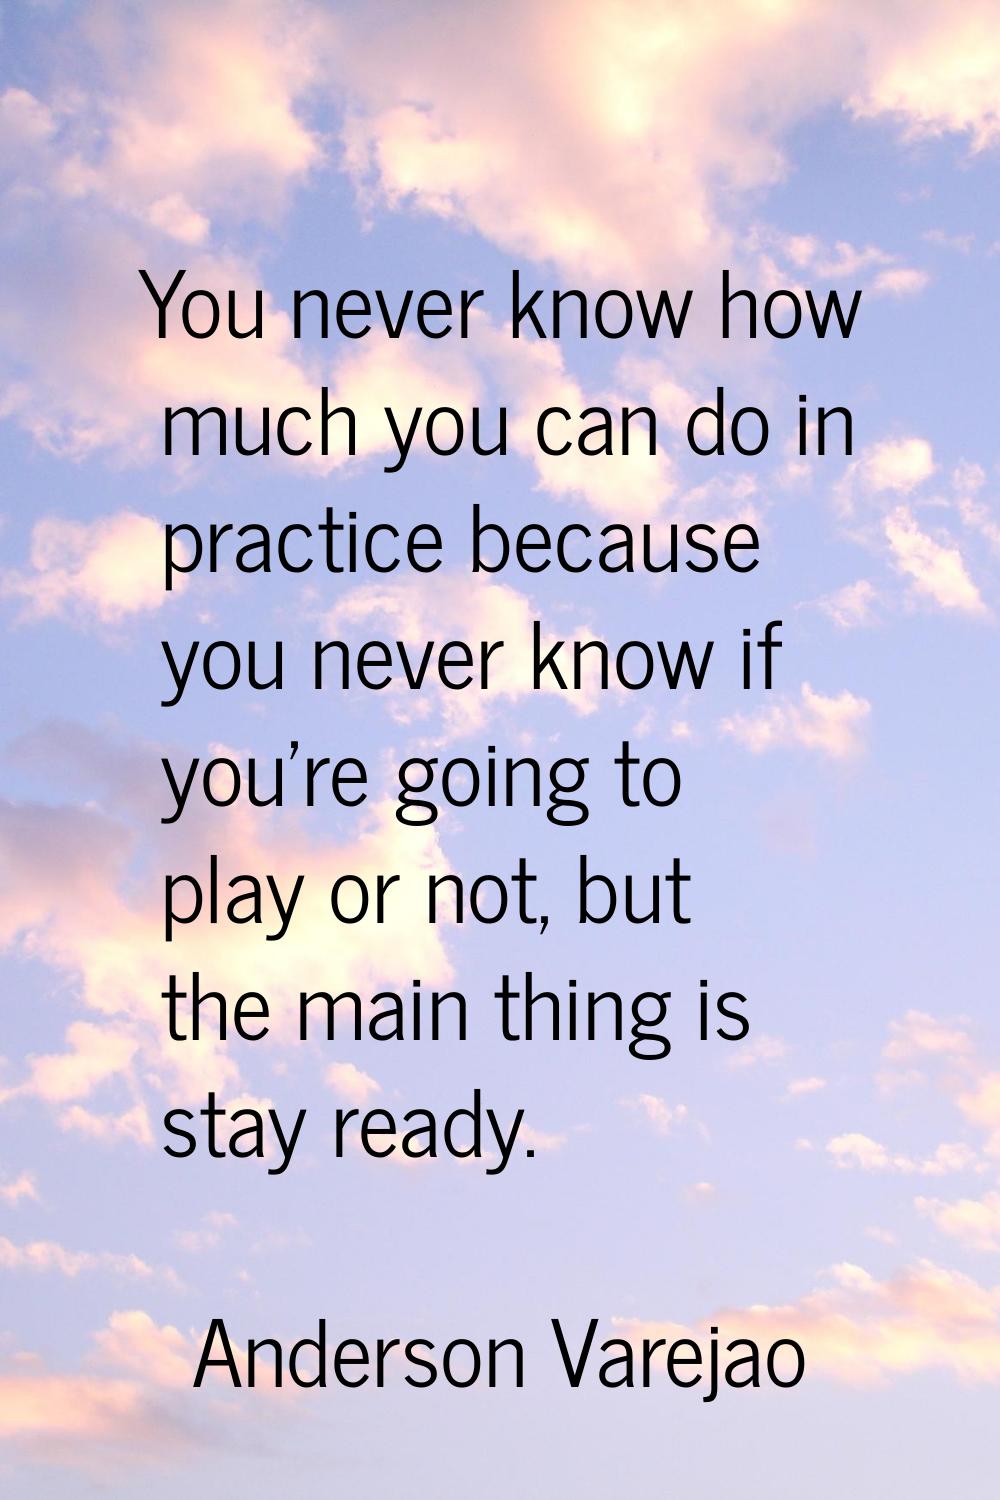 You never know how much you can do in practice because you never know if you're going to play or no